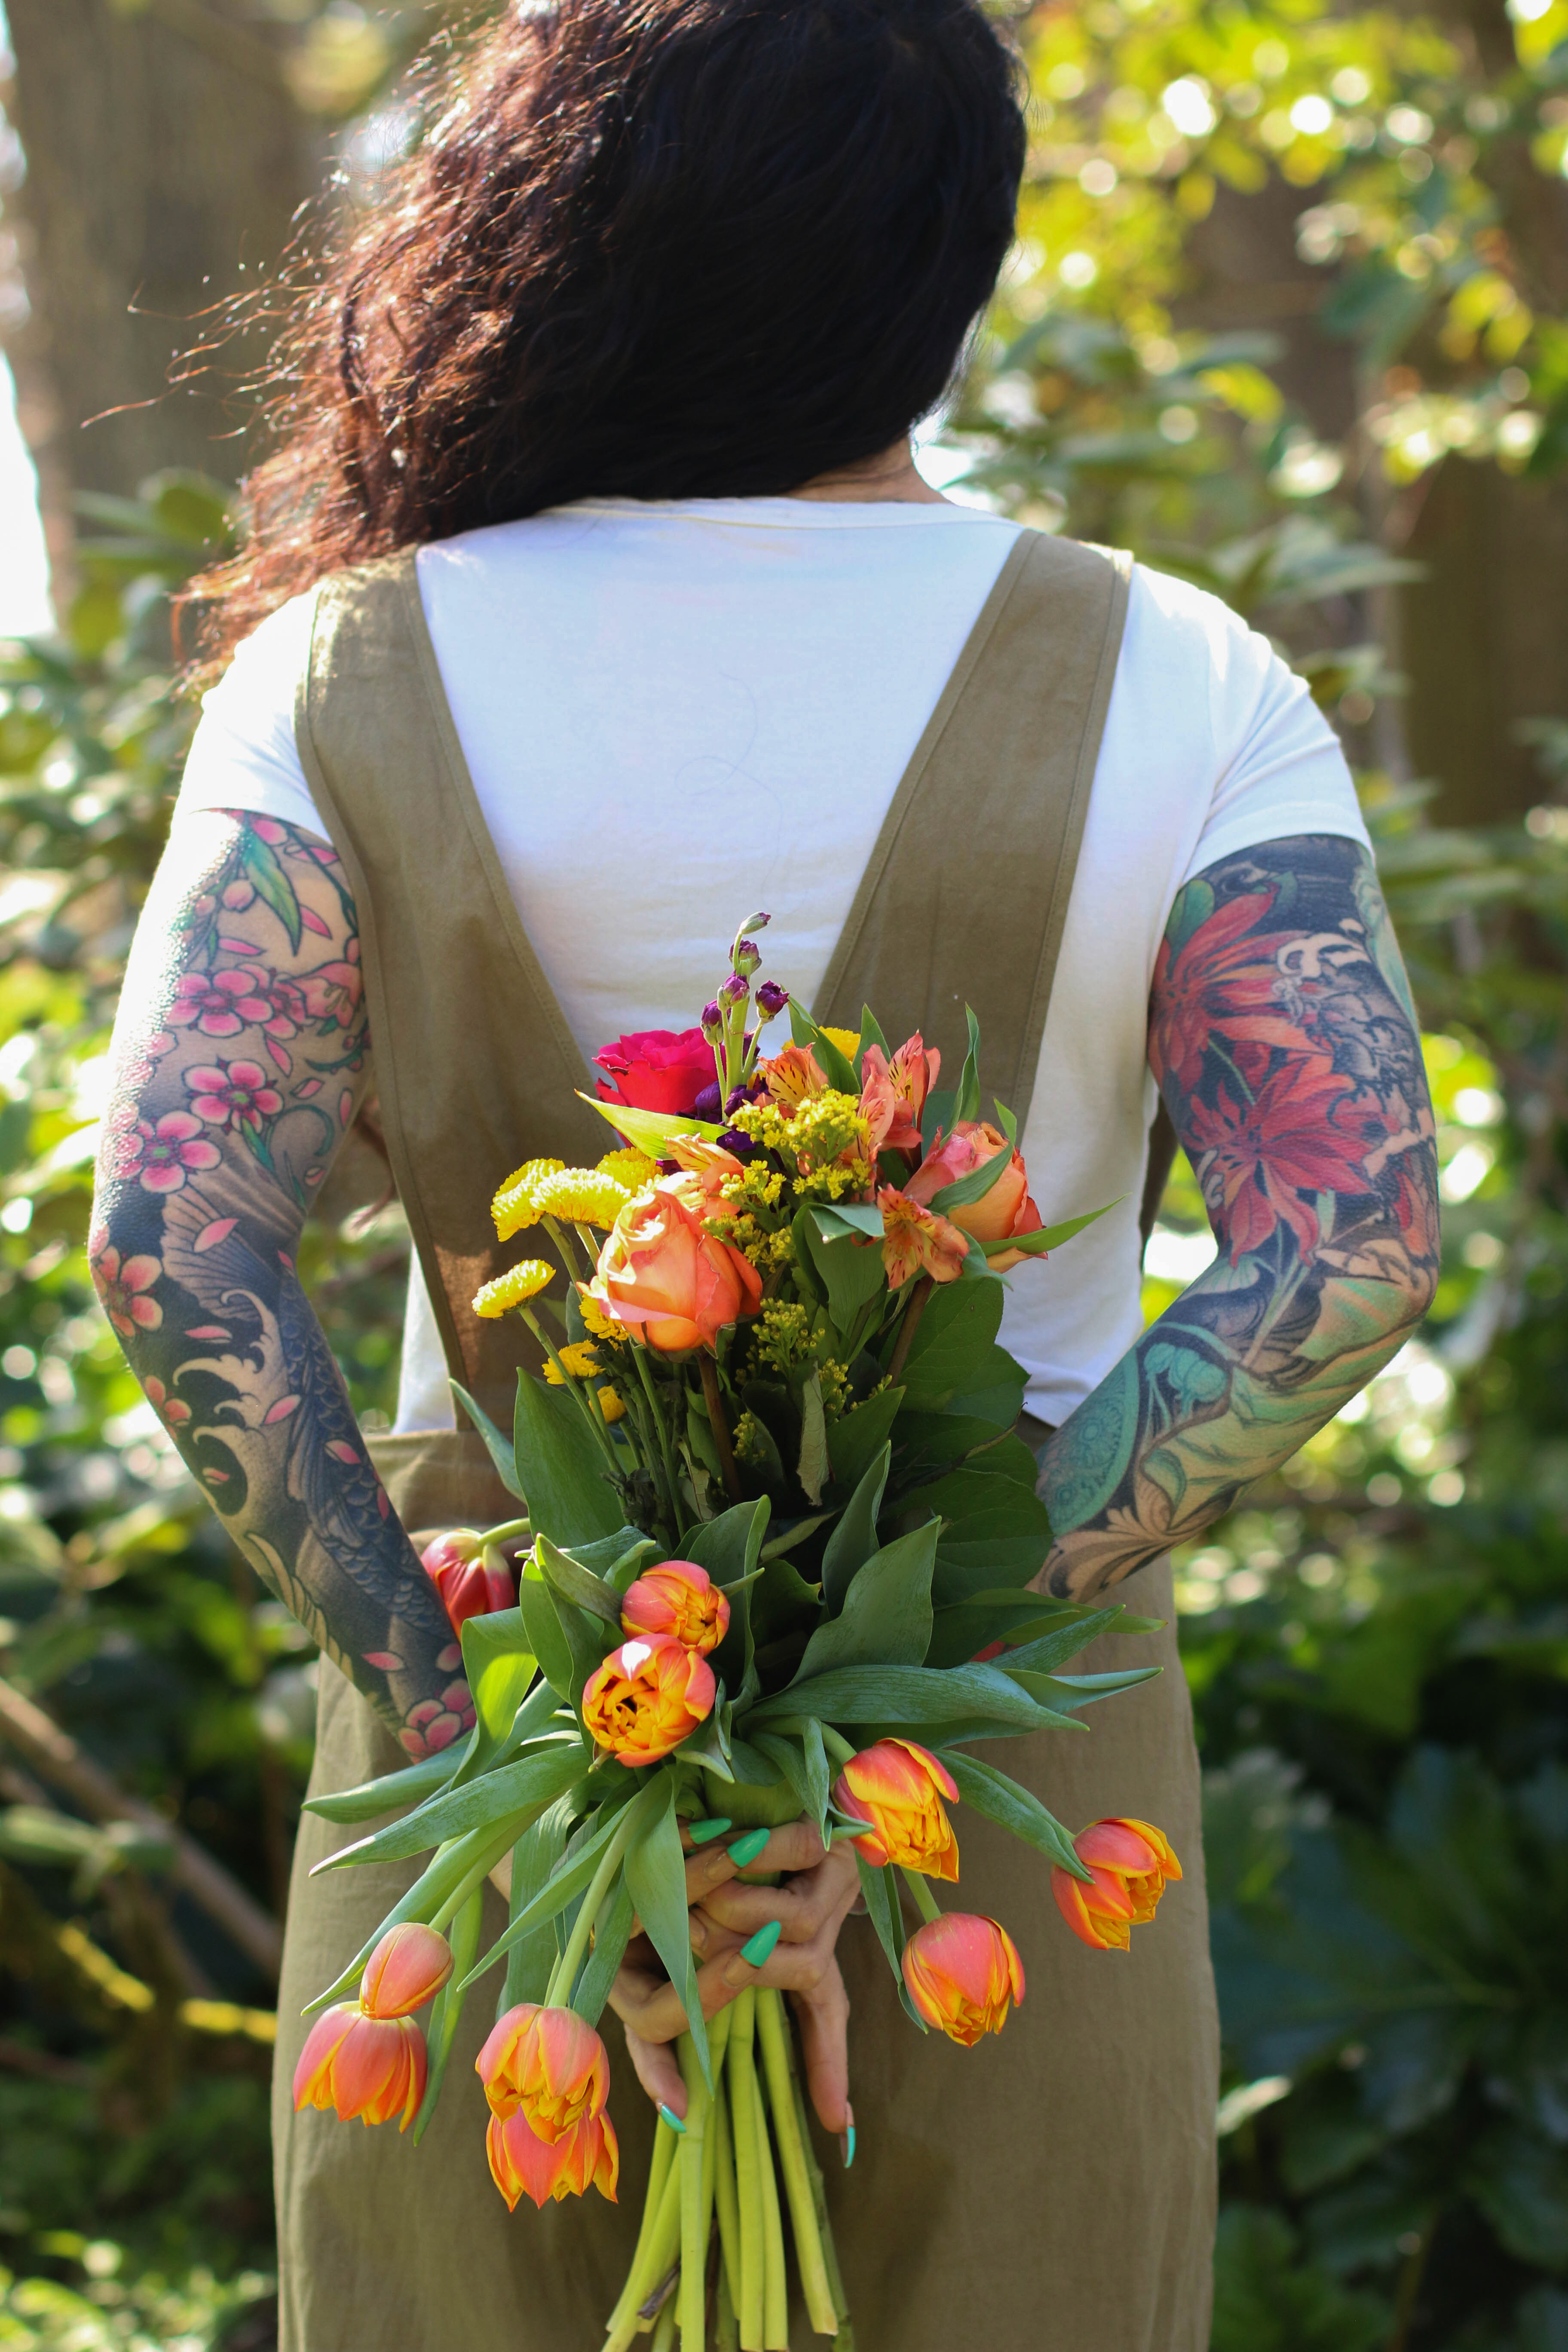 young-woman-with-tattooed-arm-sleeves-standing-outside-facing-away-from-camera-holding-big-bouquet-of-fresh-spring-flowers-behind-her-back